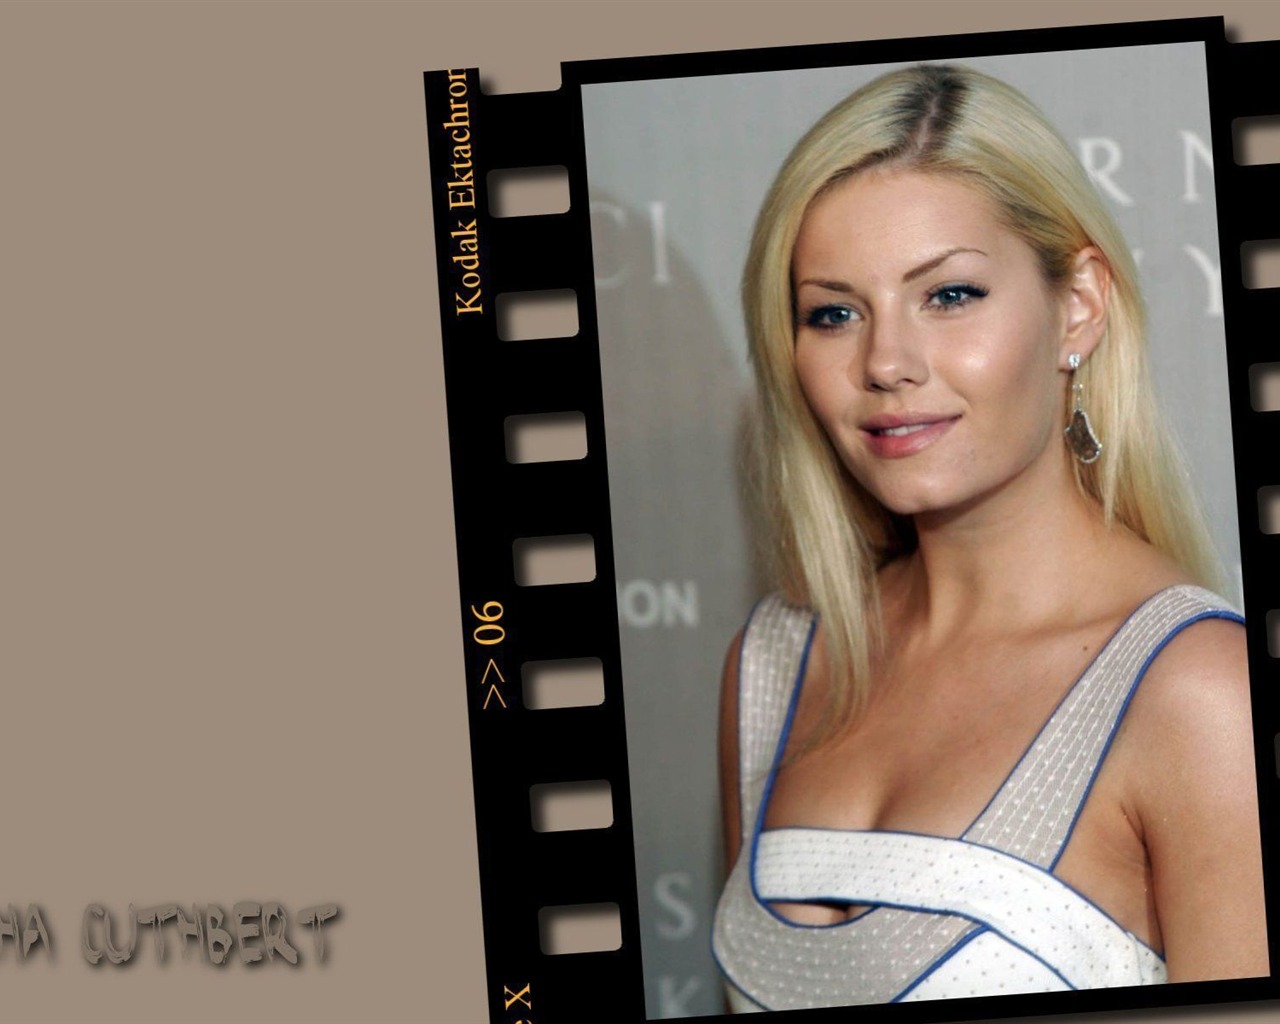 Elisha Cuthbert #011 - 1280x1024 Wallpapers Pictures Photos Images